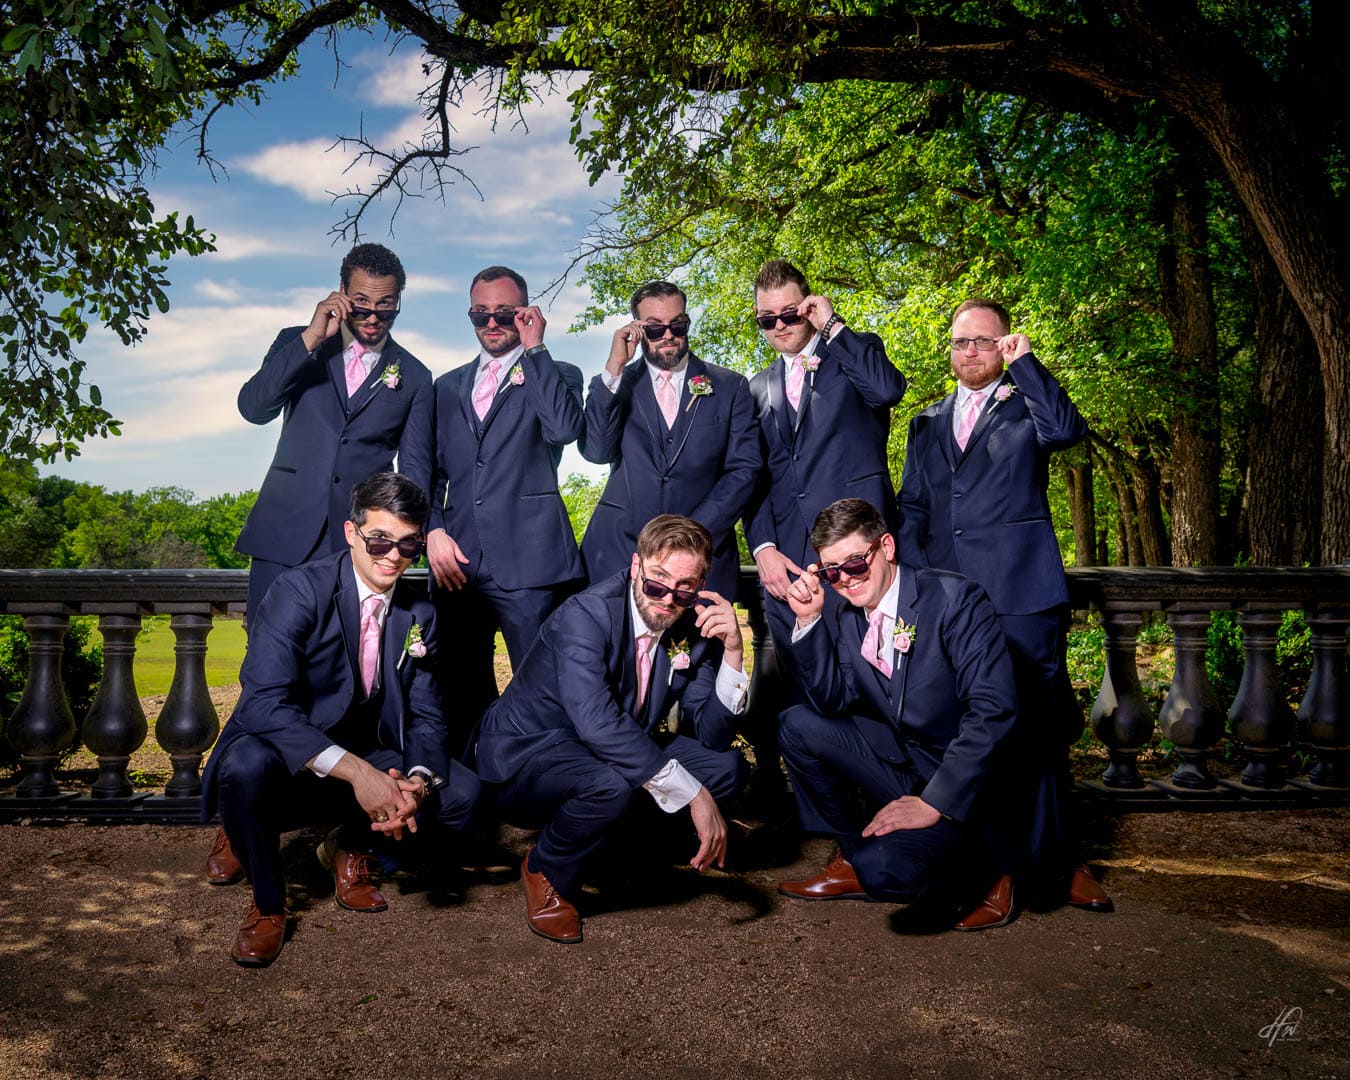 Groom and 7 groomsmen in blue suits and pink ties looking over the tops of their sunglasses.